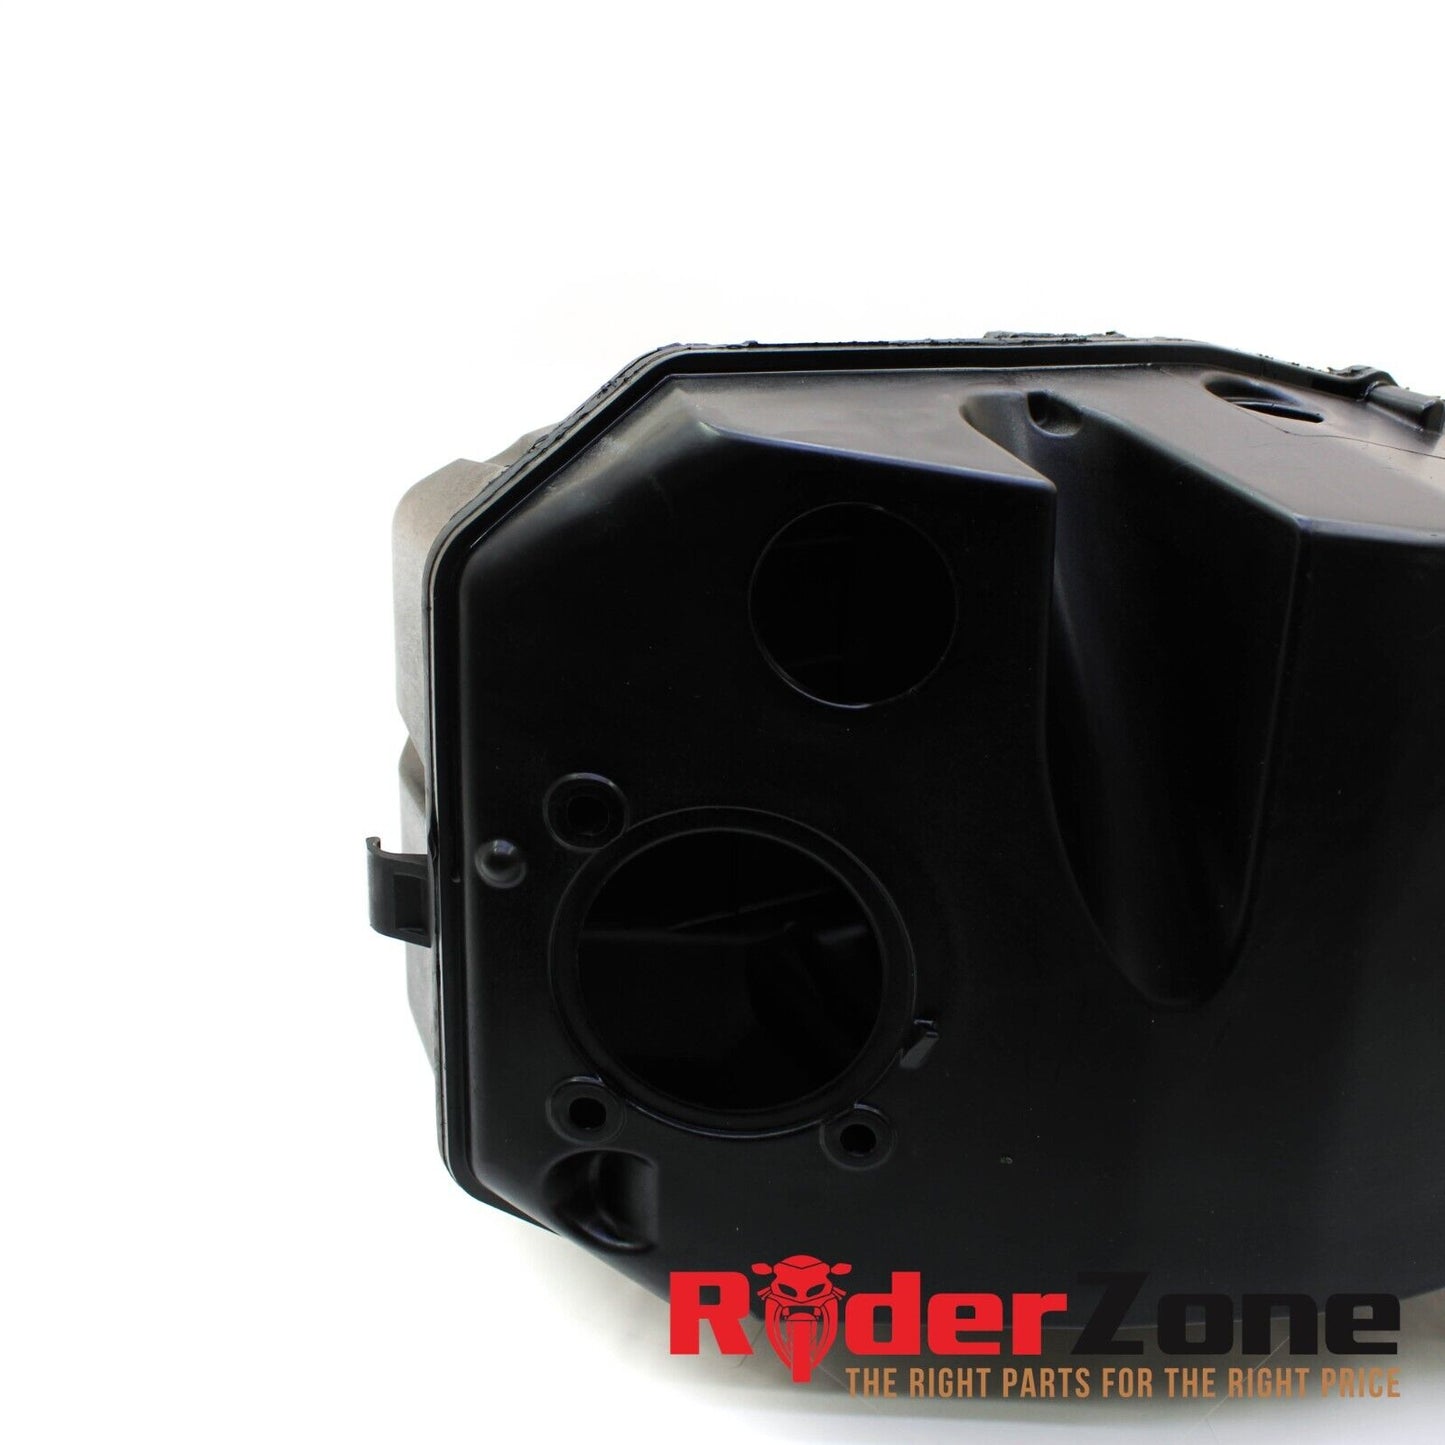 2003 - 2007 DUCATI 999 AIRBOX AIR FILTER HOUSING CLEANER UNIT BLACK STOCK